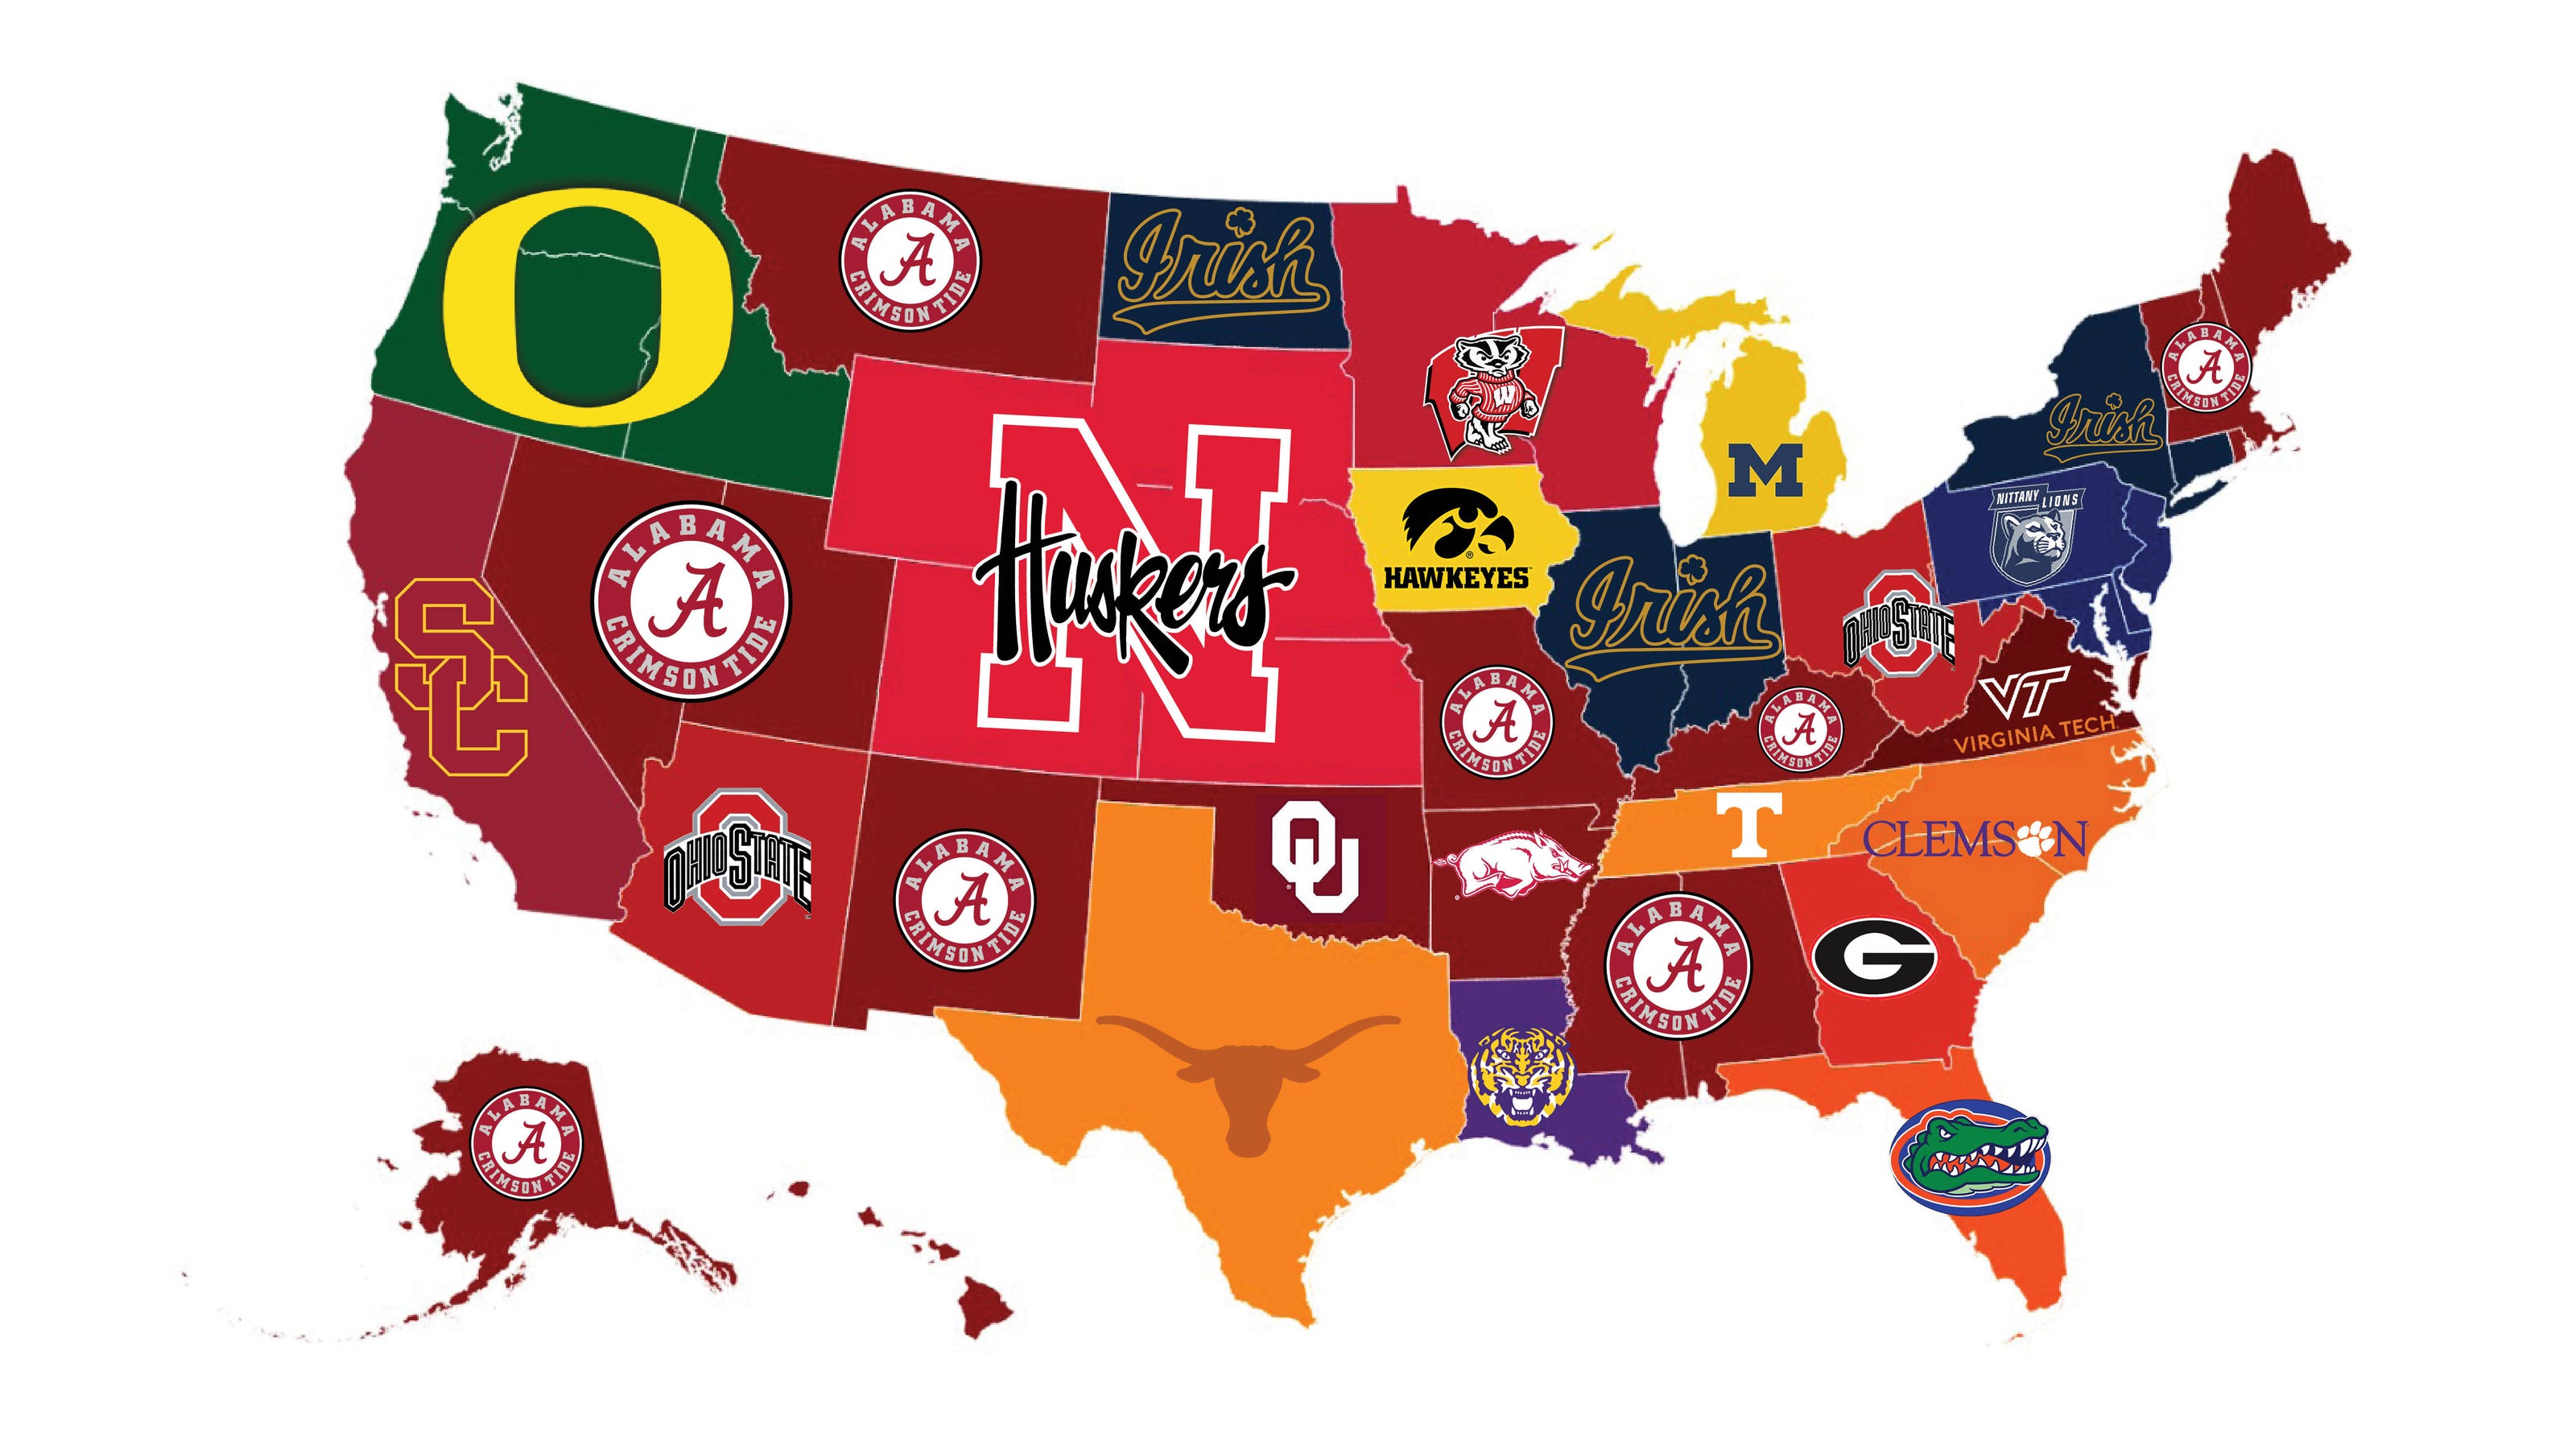 Who are the most college teams? Alabama leads